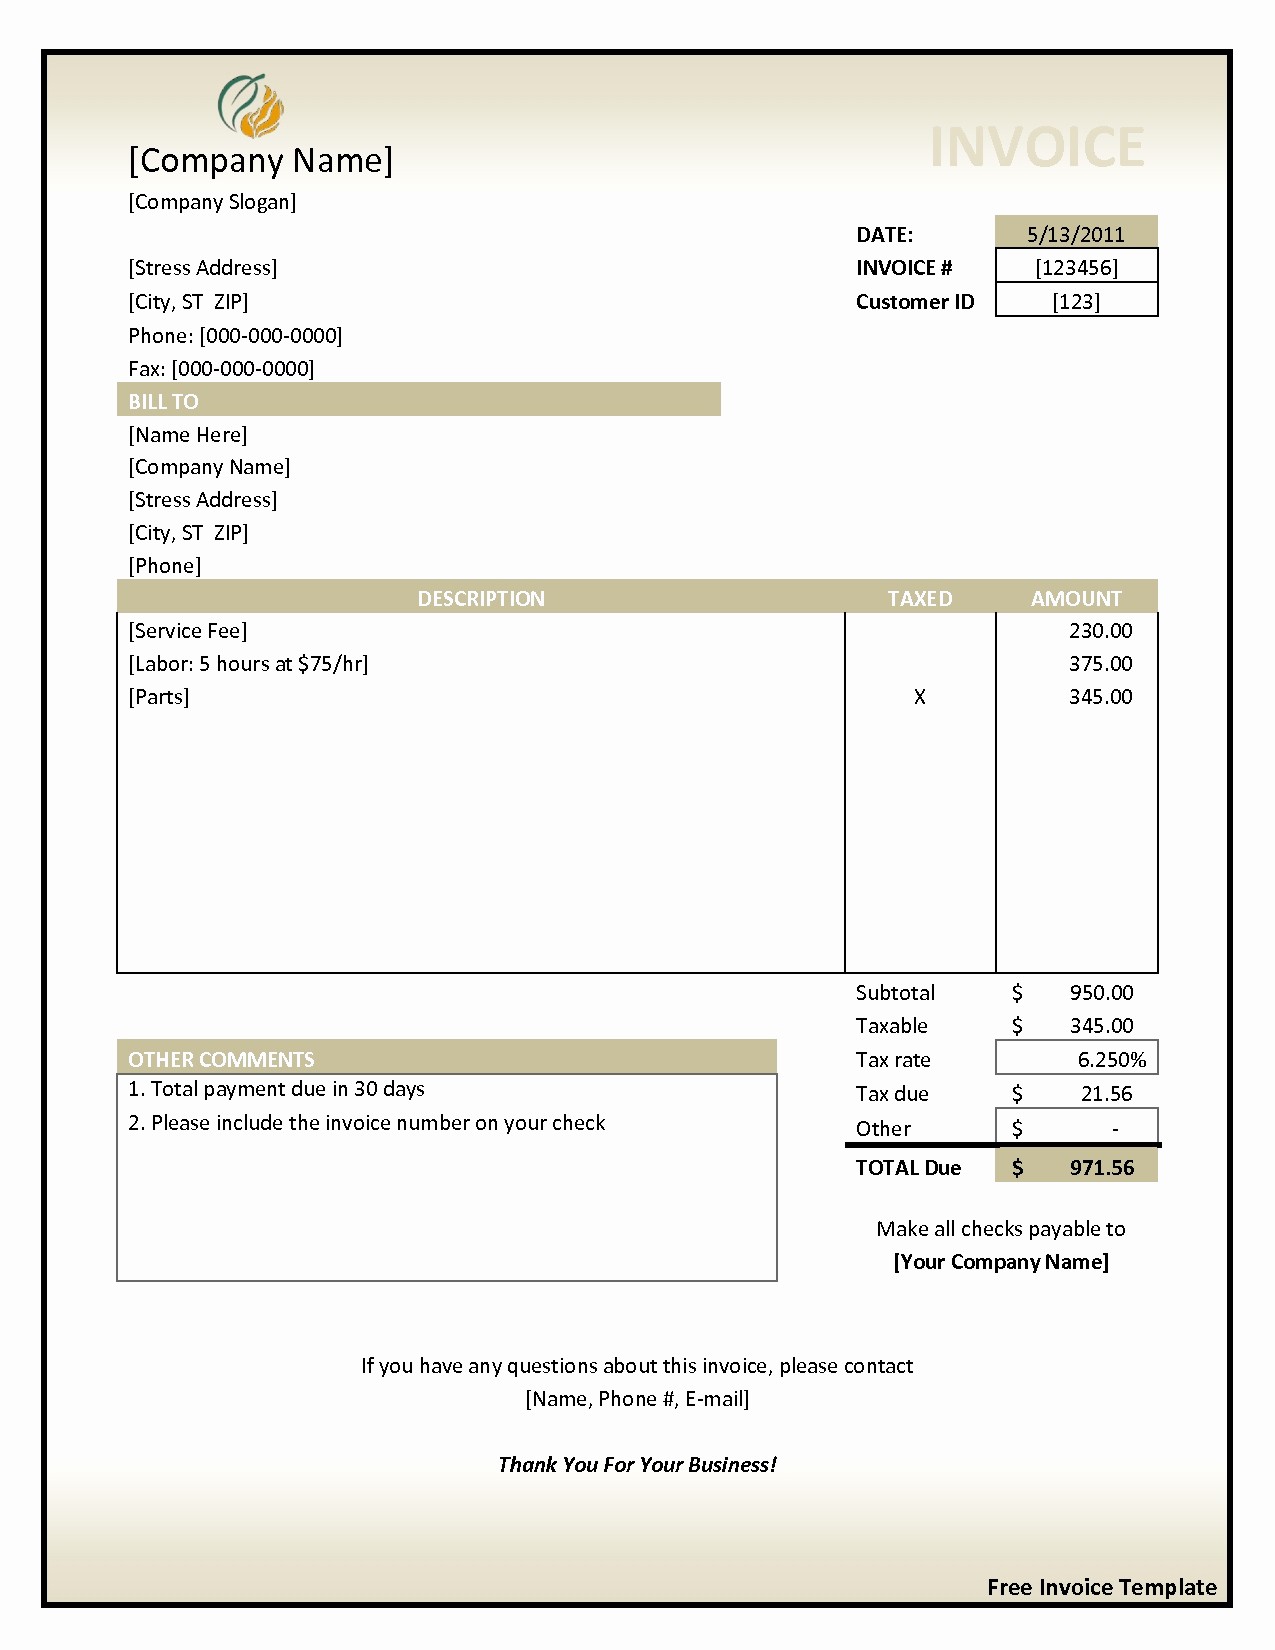 Sample Invoices for Small Business Elegant Sample Medical Invoice Invoice Template Ideas